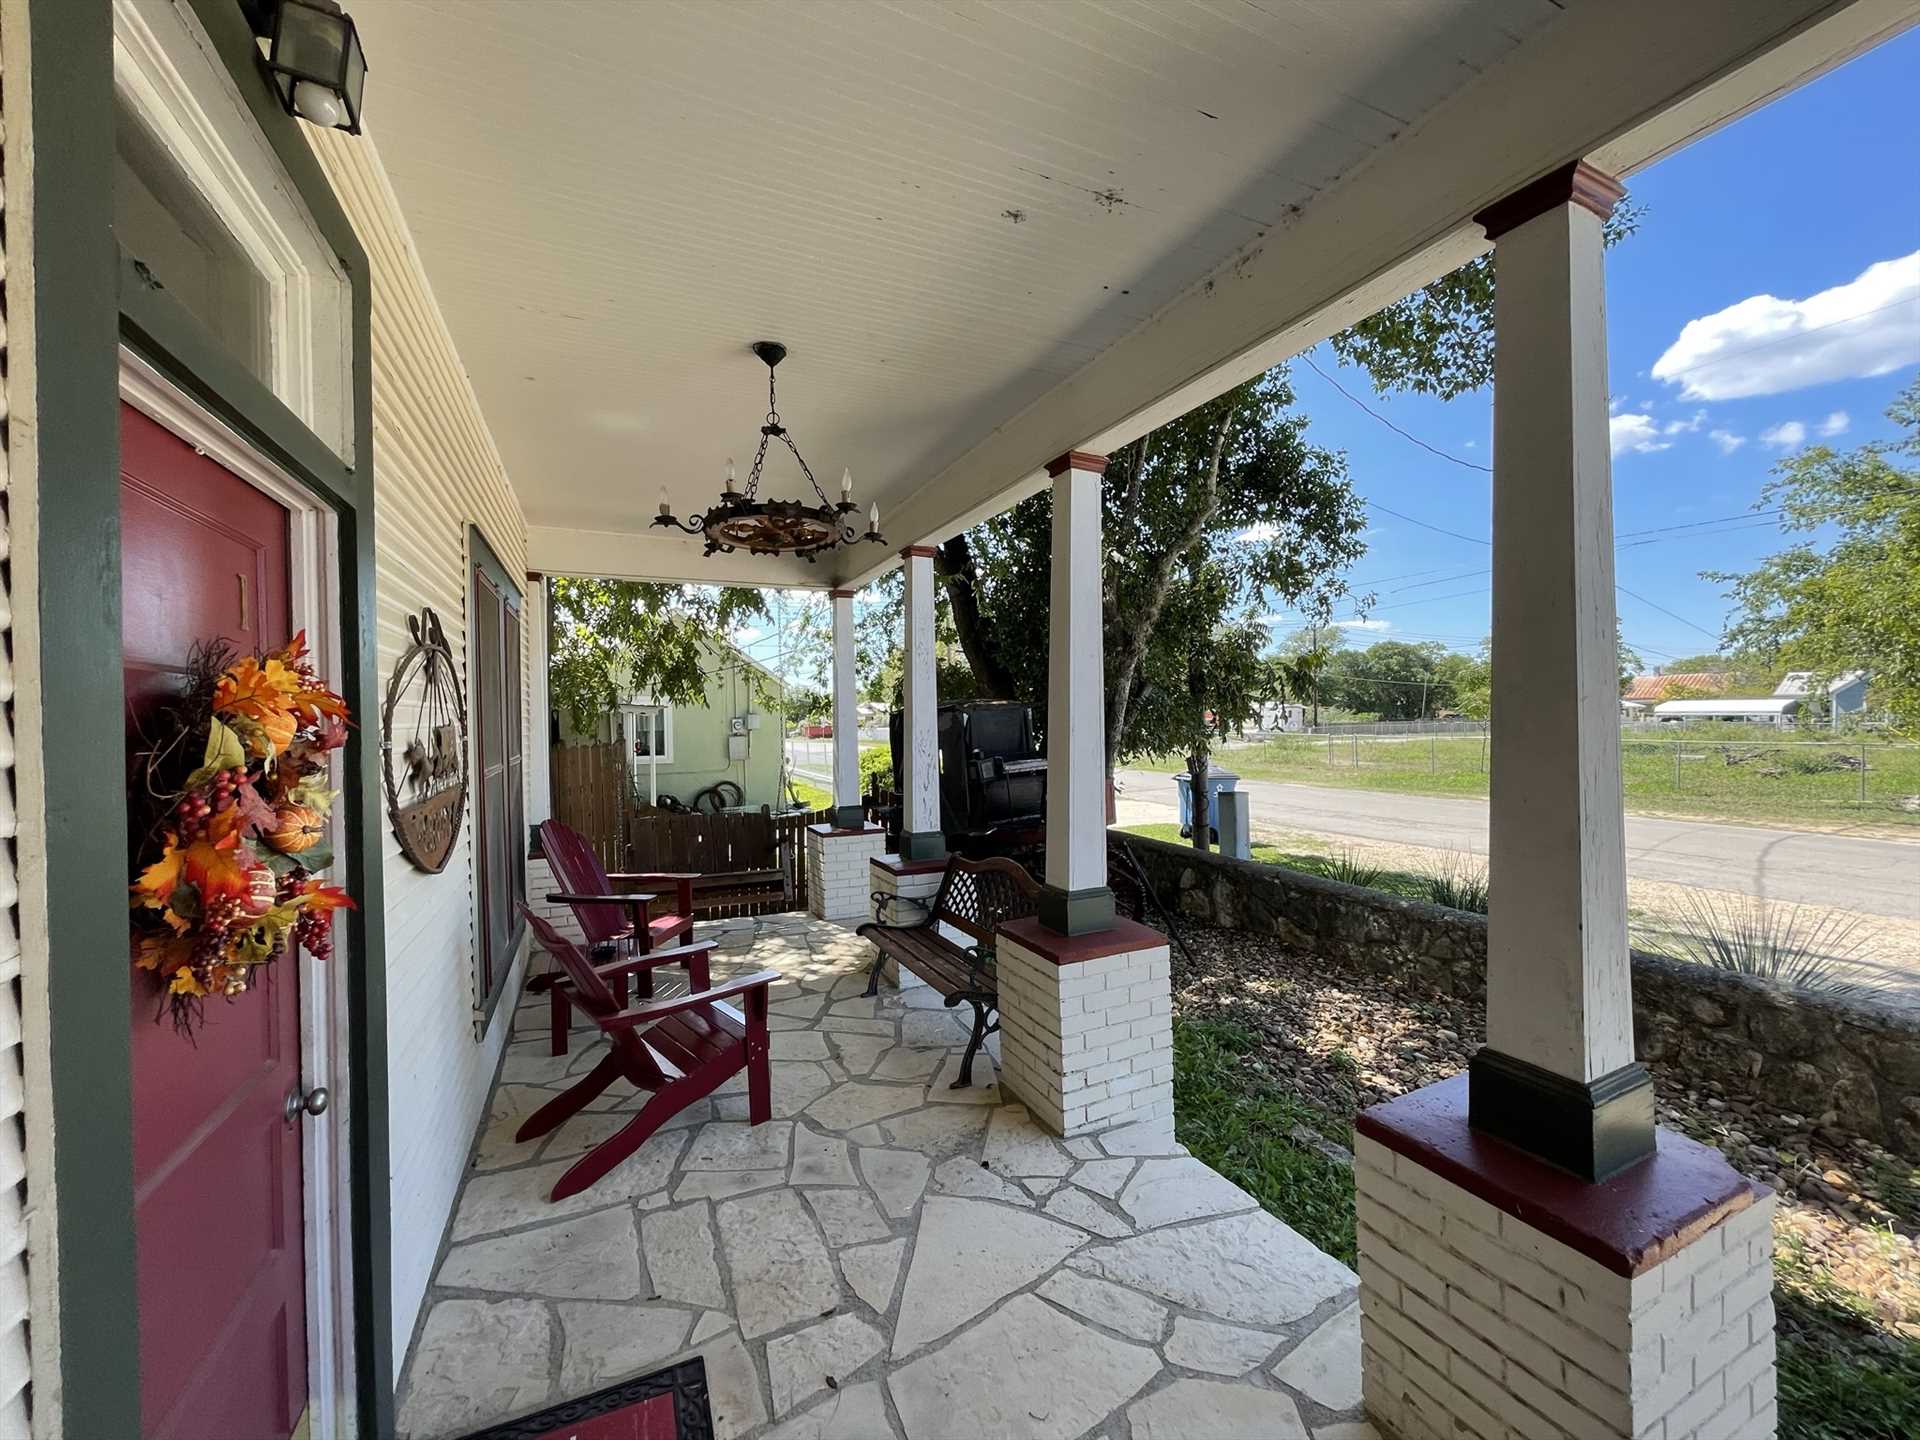                                                 Enjoy pretty views of the Hill Country sky from the cool comfort of the porch!